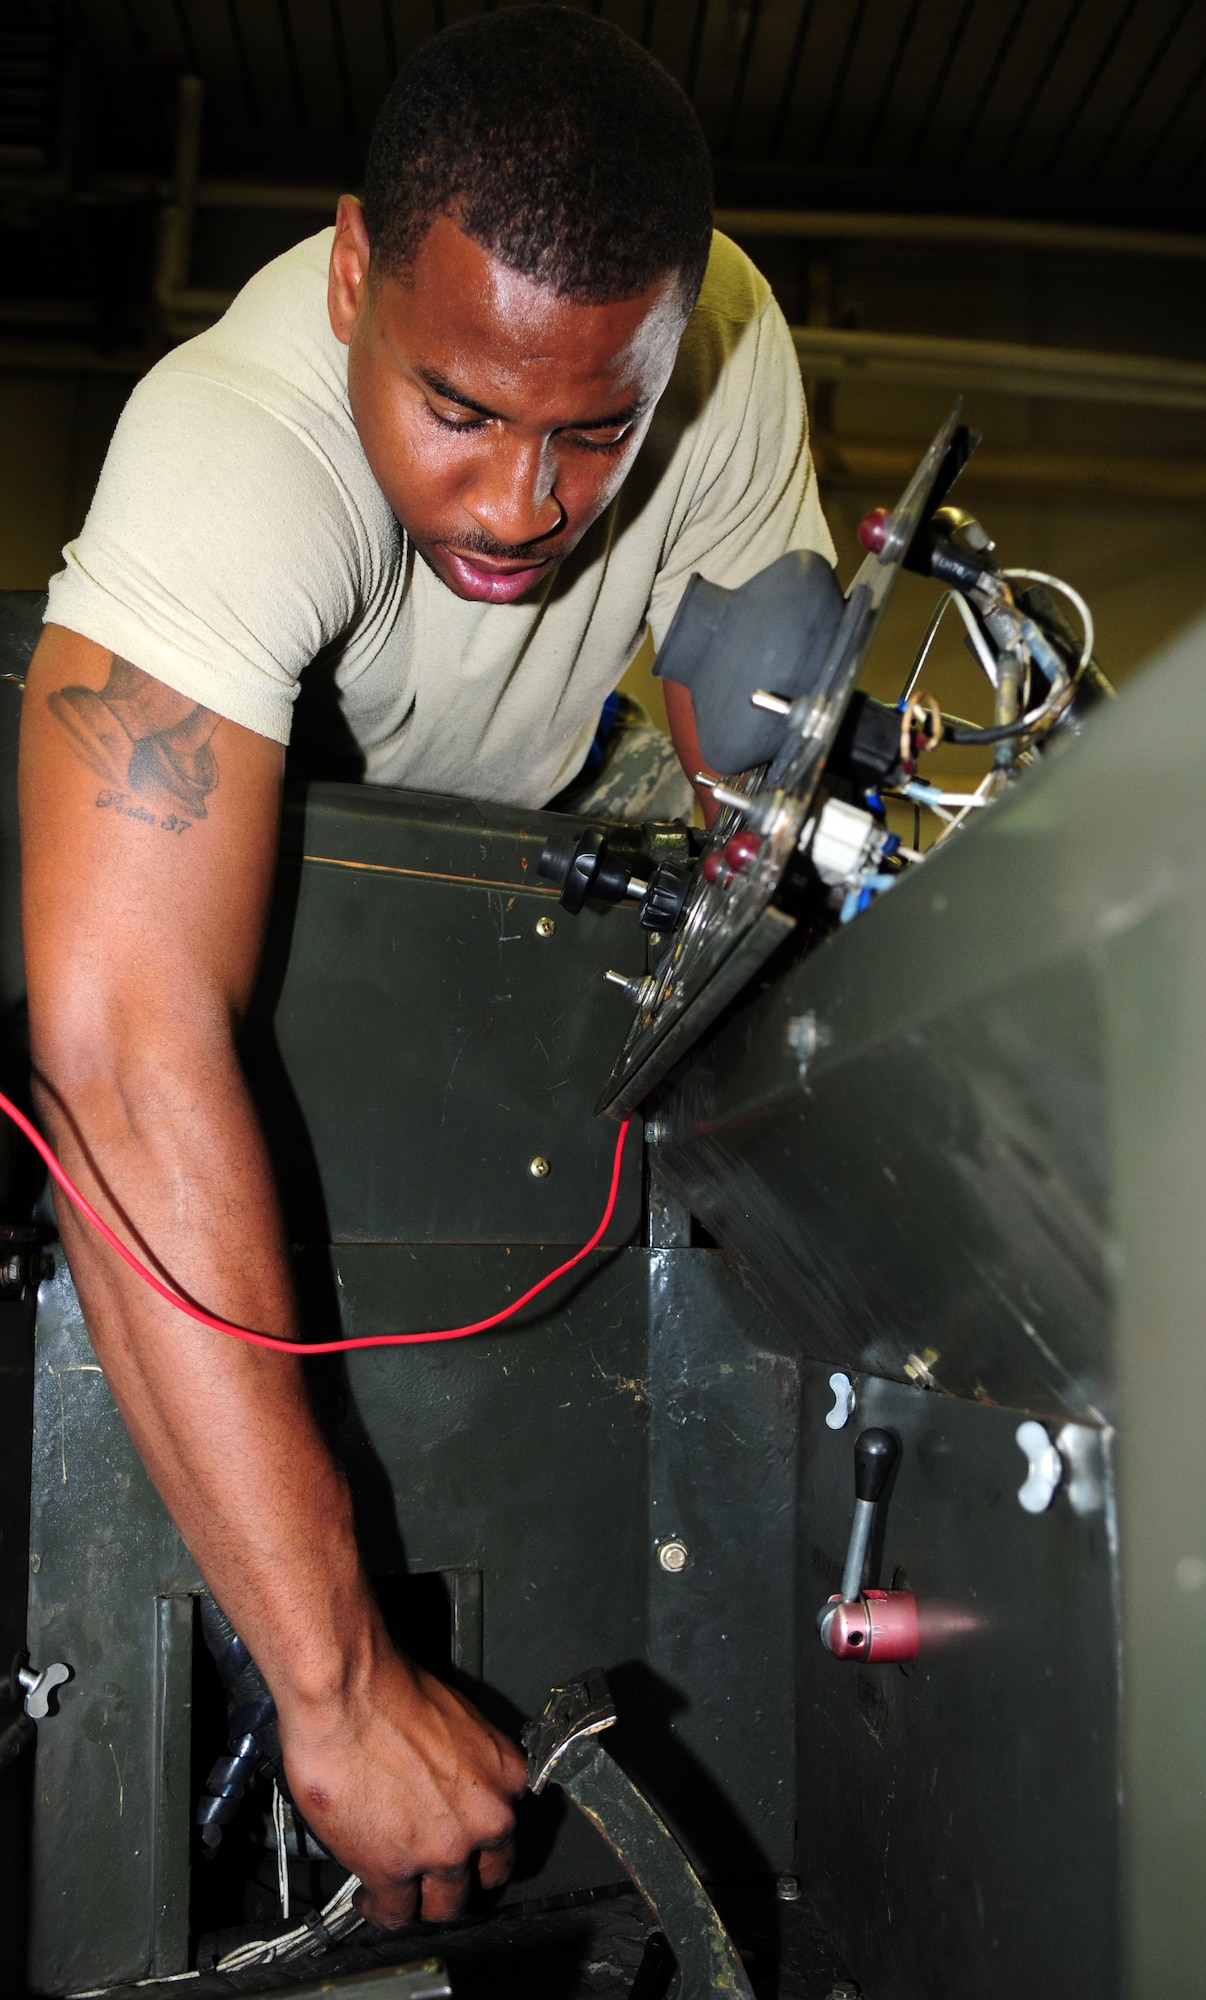 SPANGDAHLEM AIR BASE, Germany – Staff Sgt. Antwan Short, 52nd Equipment Maintenance Squadron aerospace ground equipment craftsman, rewires a control panel on an MJ-1B bomb lift here Sept. 6. The aerospace ground equipment flight is responsible for providing and maintaining both powered and non-powered AGE to support the 52nd Fighter Wing’s flying operations. (U.S. Air Force photo/Airman 1st Class Matthew B. Fredericks)